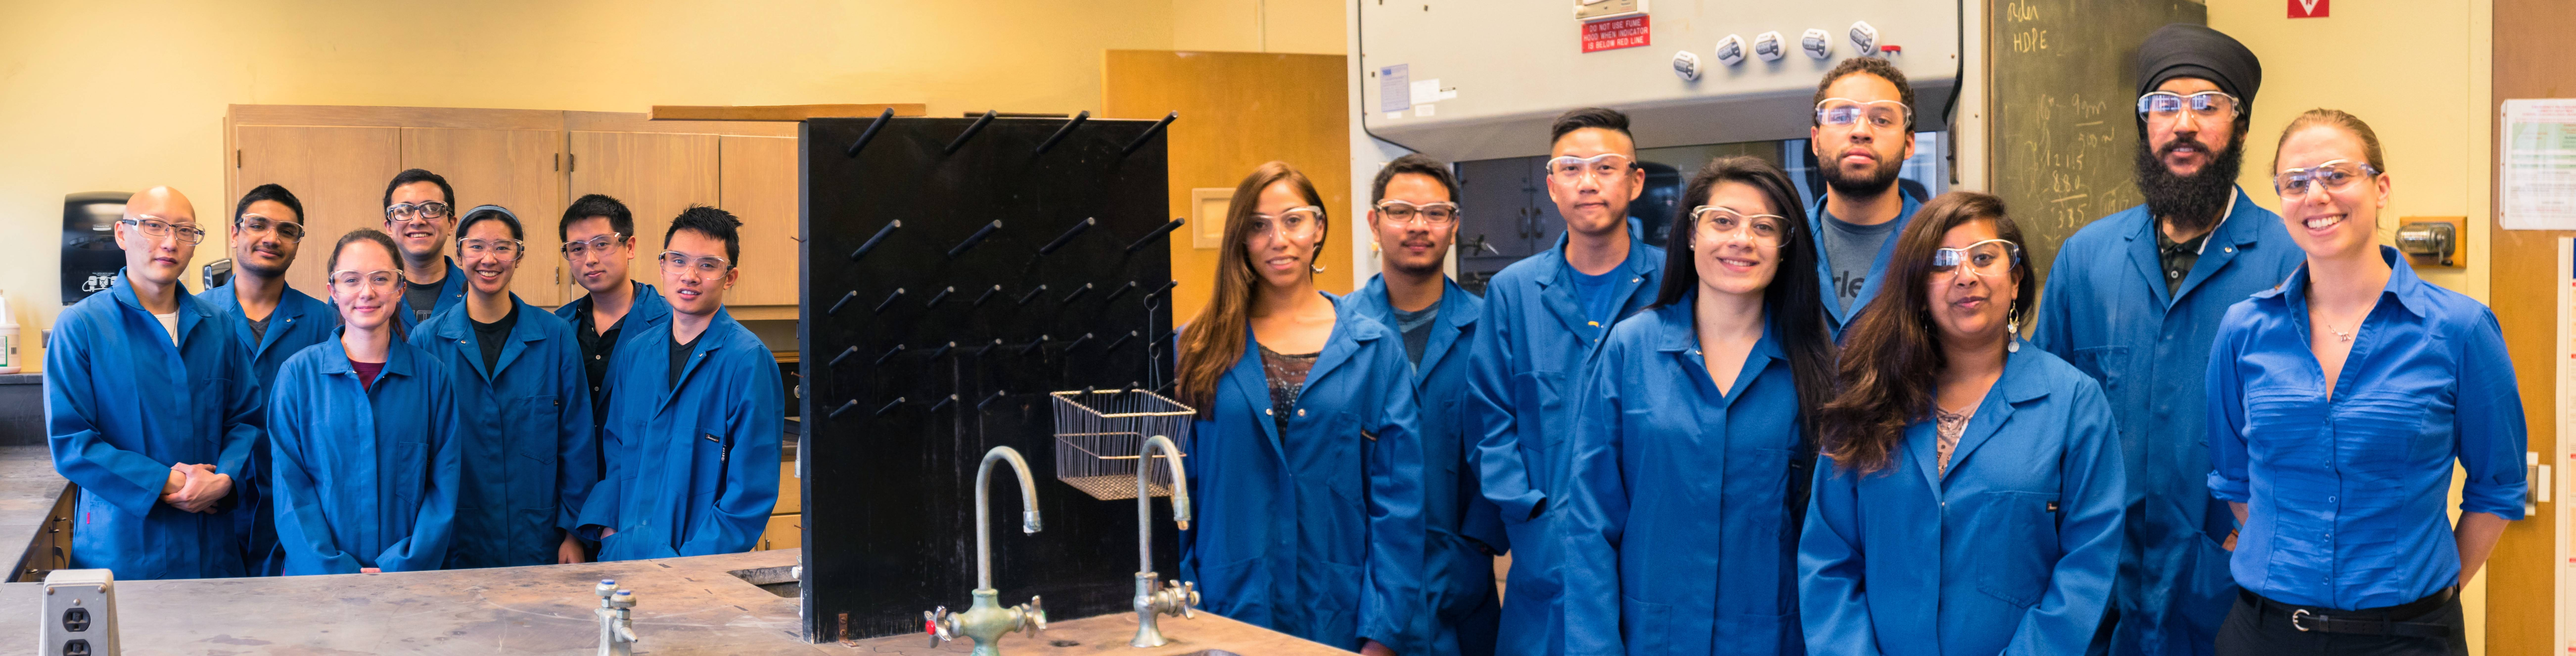 students pose for the first ever photo in the lab space